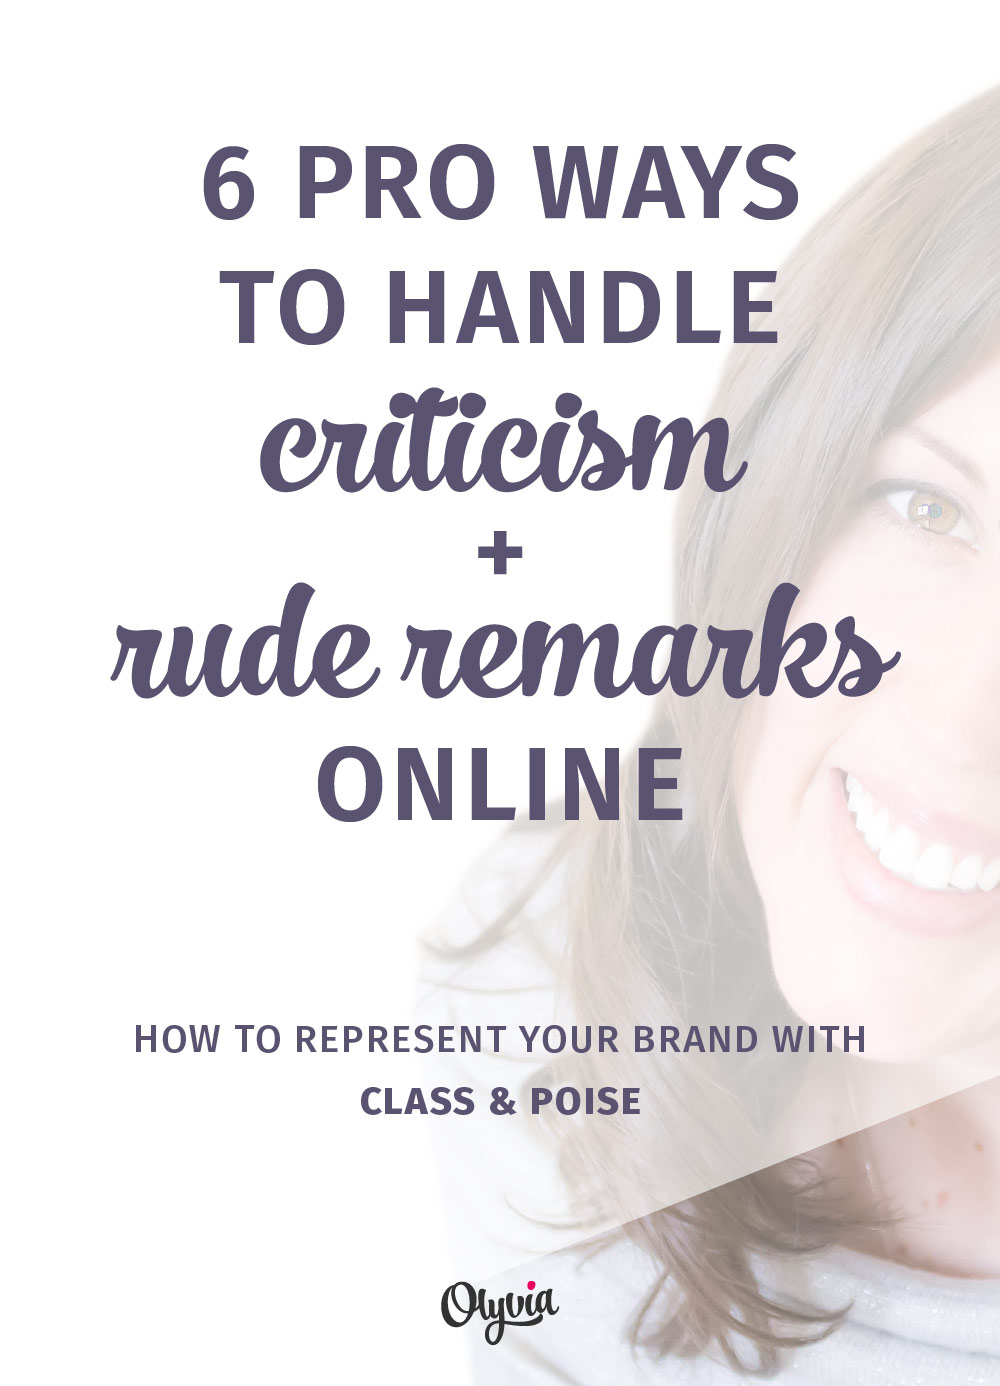 How to handle negative comments online like a true pro. There are great customer service + reputation tips for creative business owners and entrepreneurs in here!